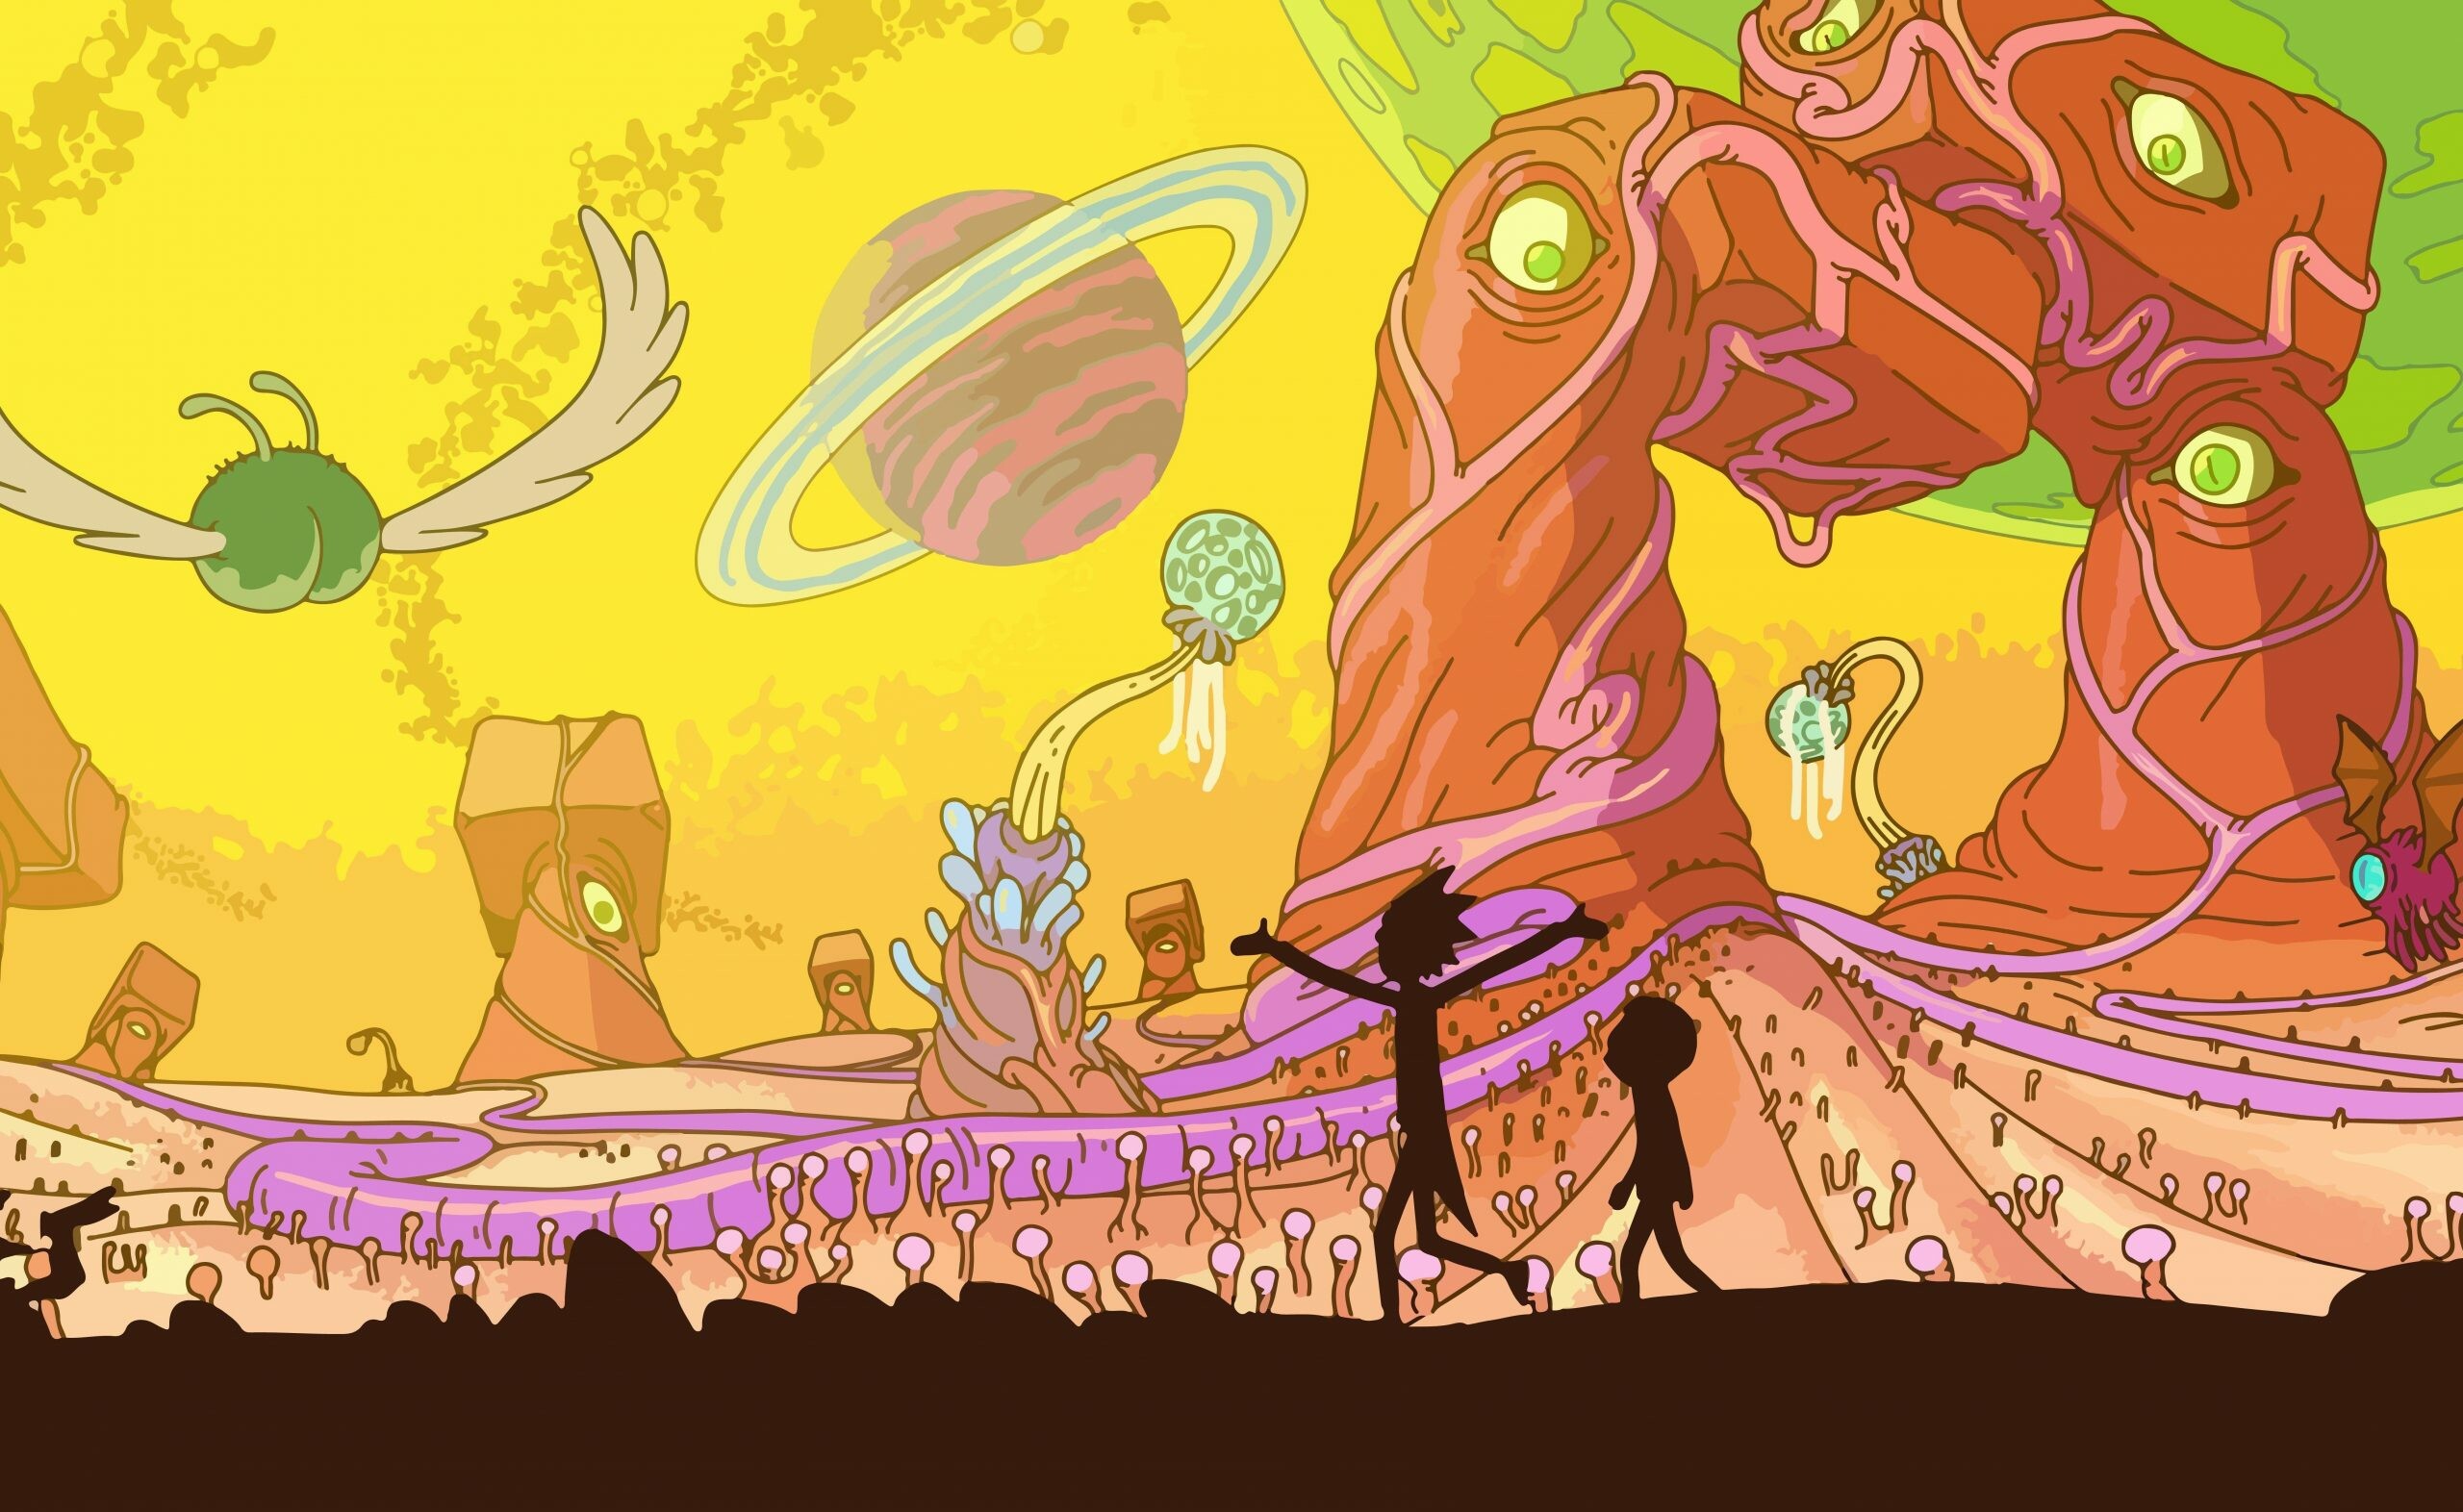 Rick and Morty: The show's first season consists of 11 twenty-two minute episodes. 2560x1580 HD Wallpaper.